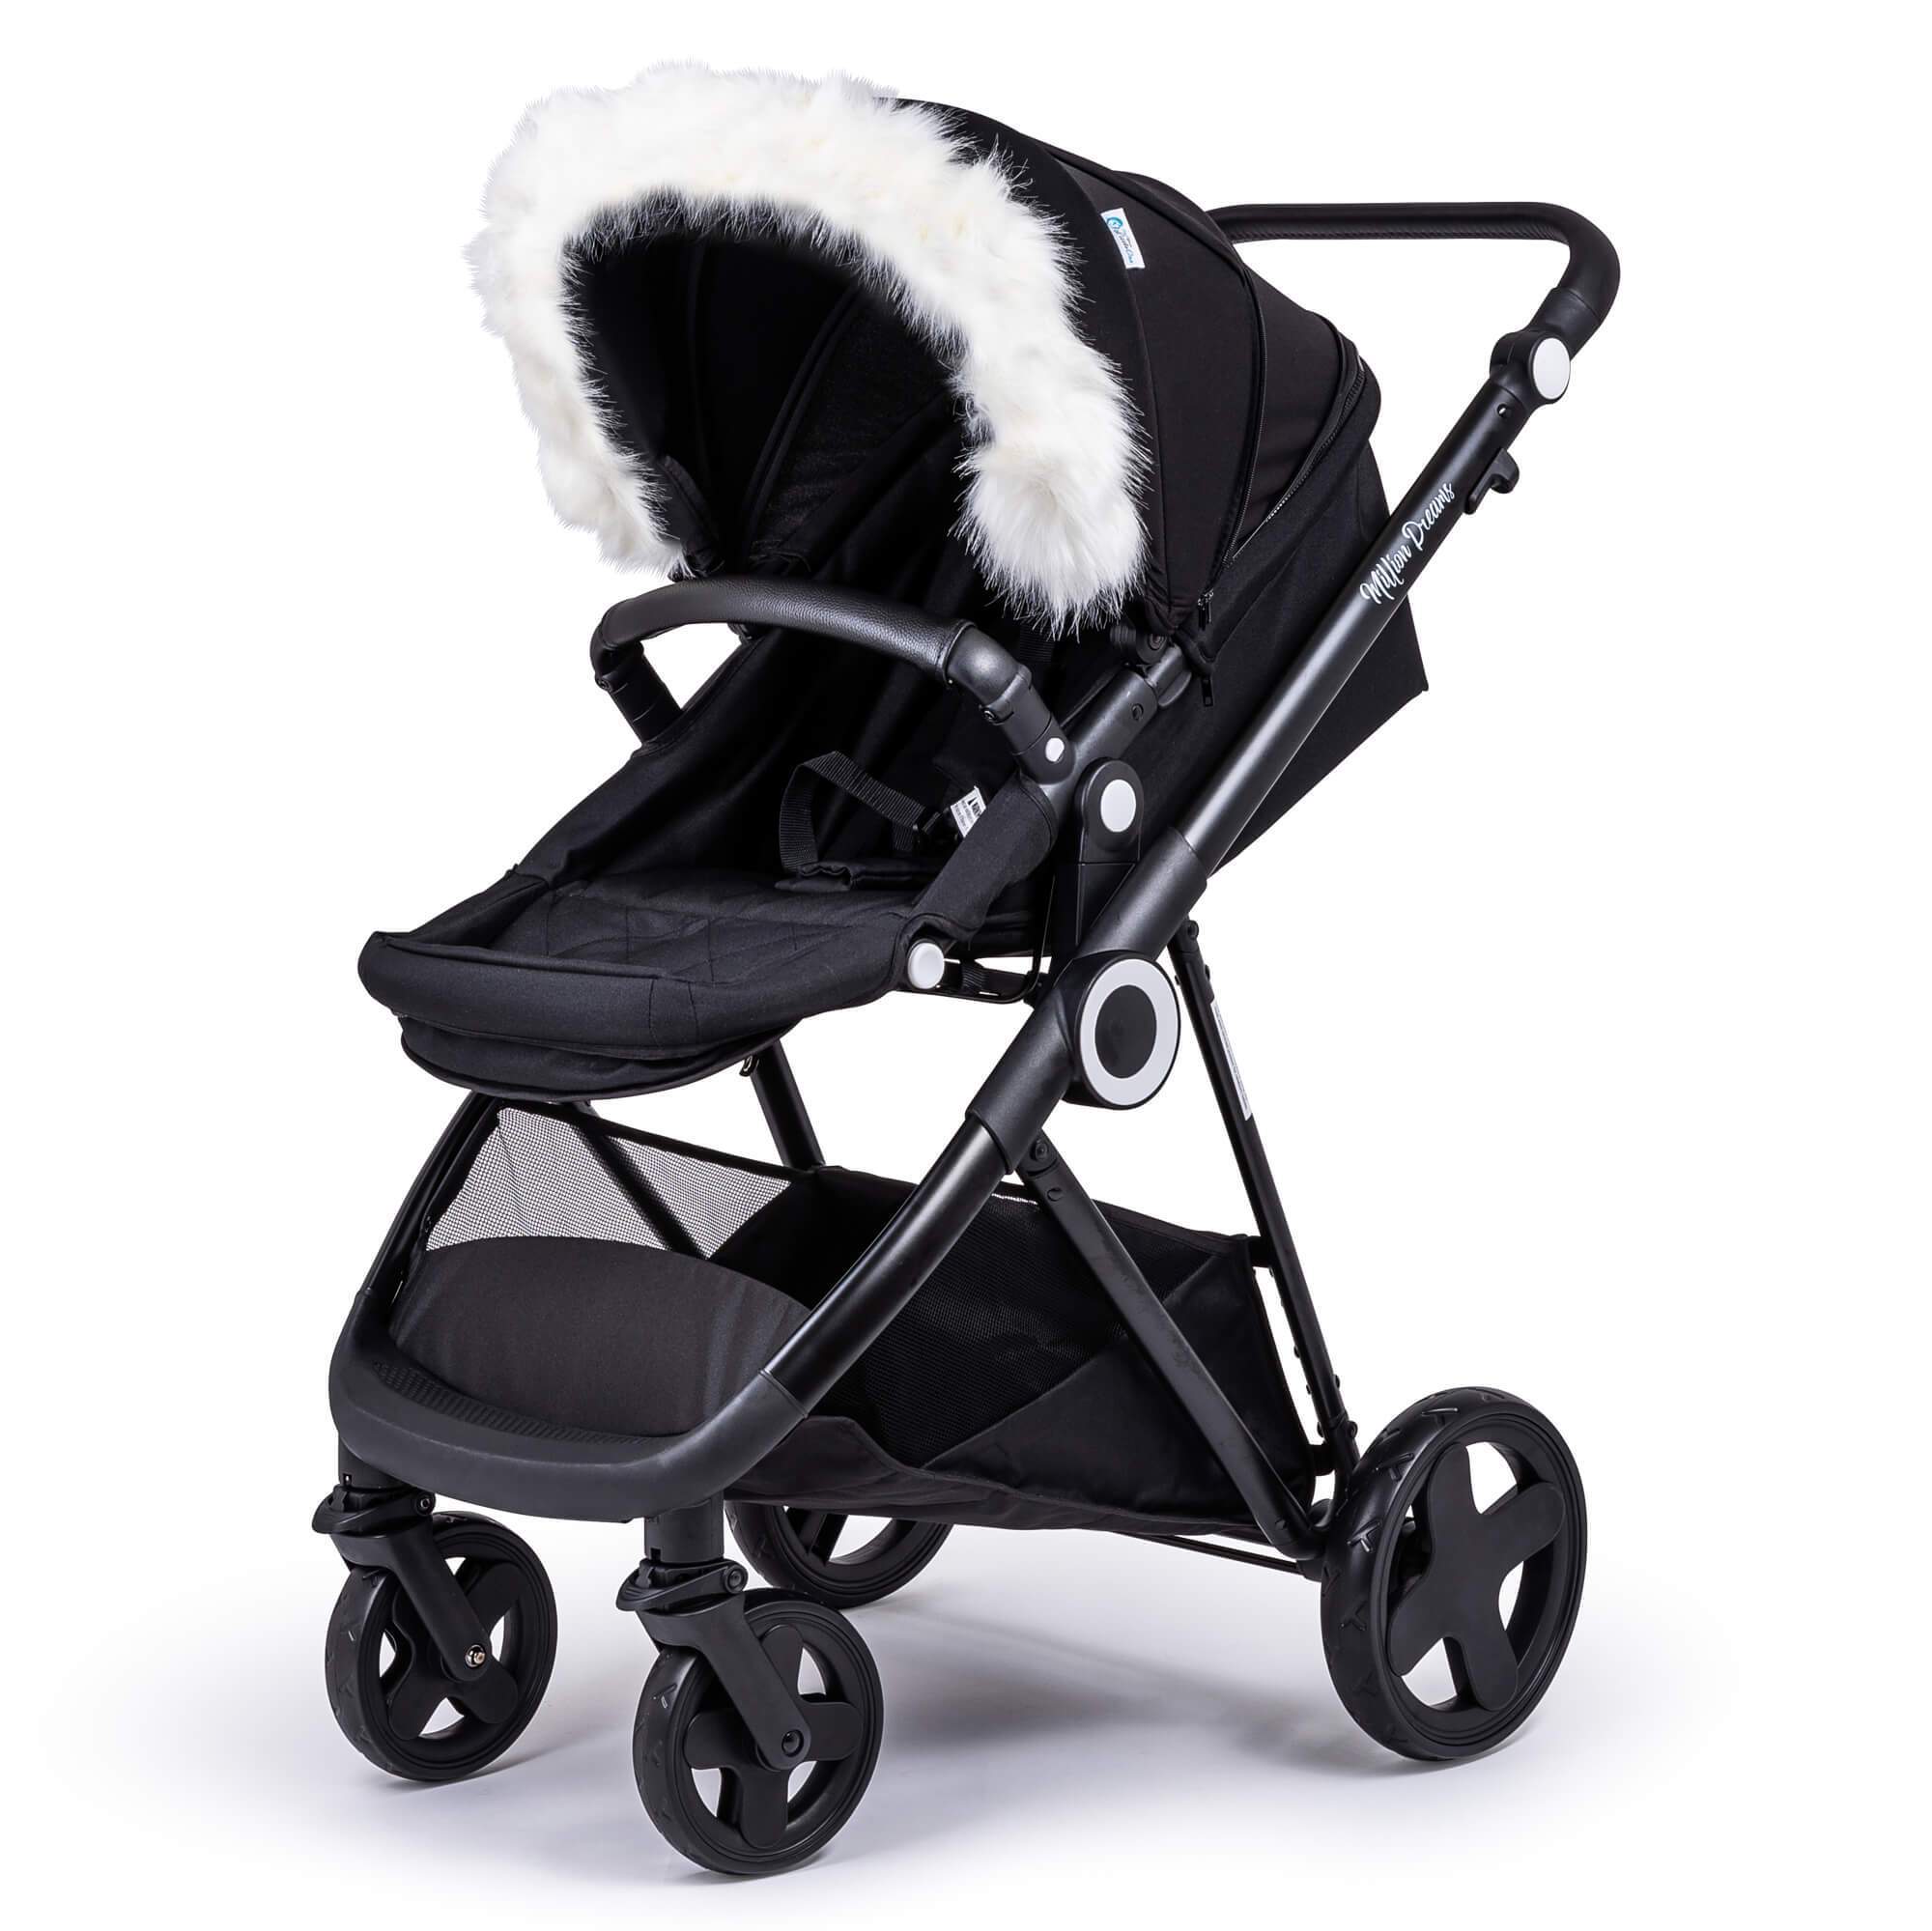 Pram Fur Hood Trim Attachment for Pushchair Compatible with Uppababy - White / Fits All Models | For Your Little One